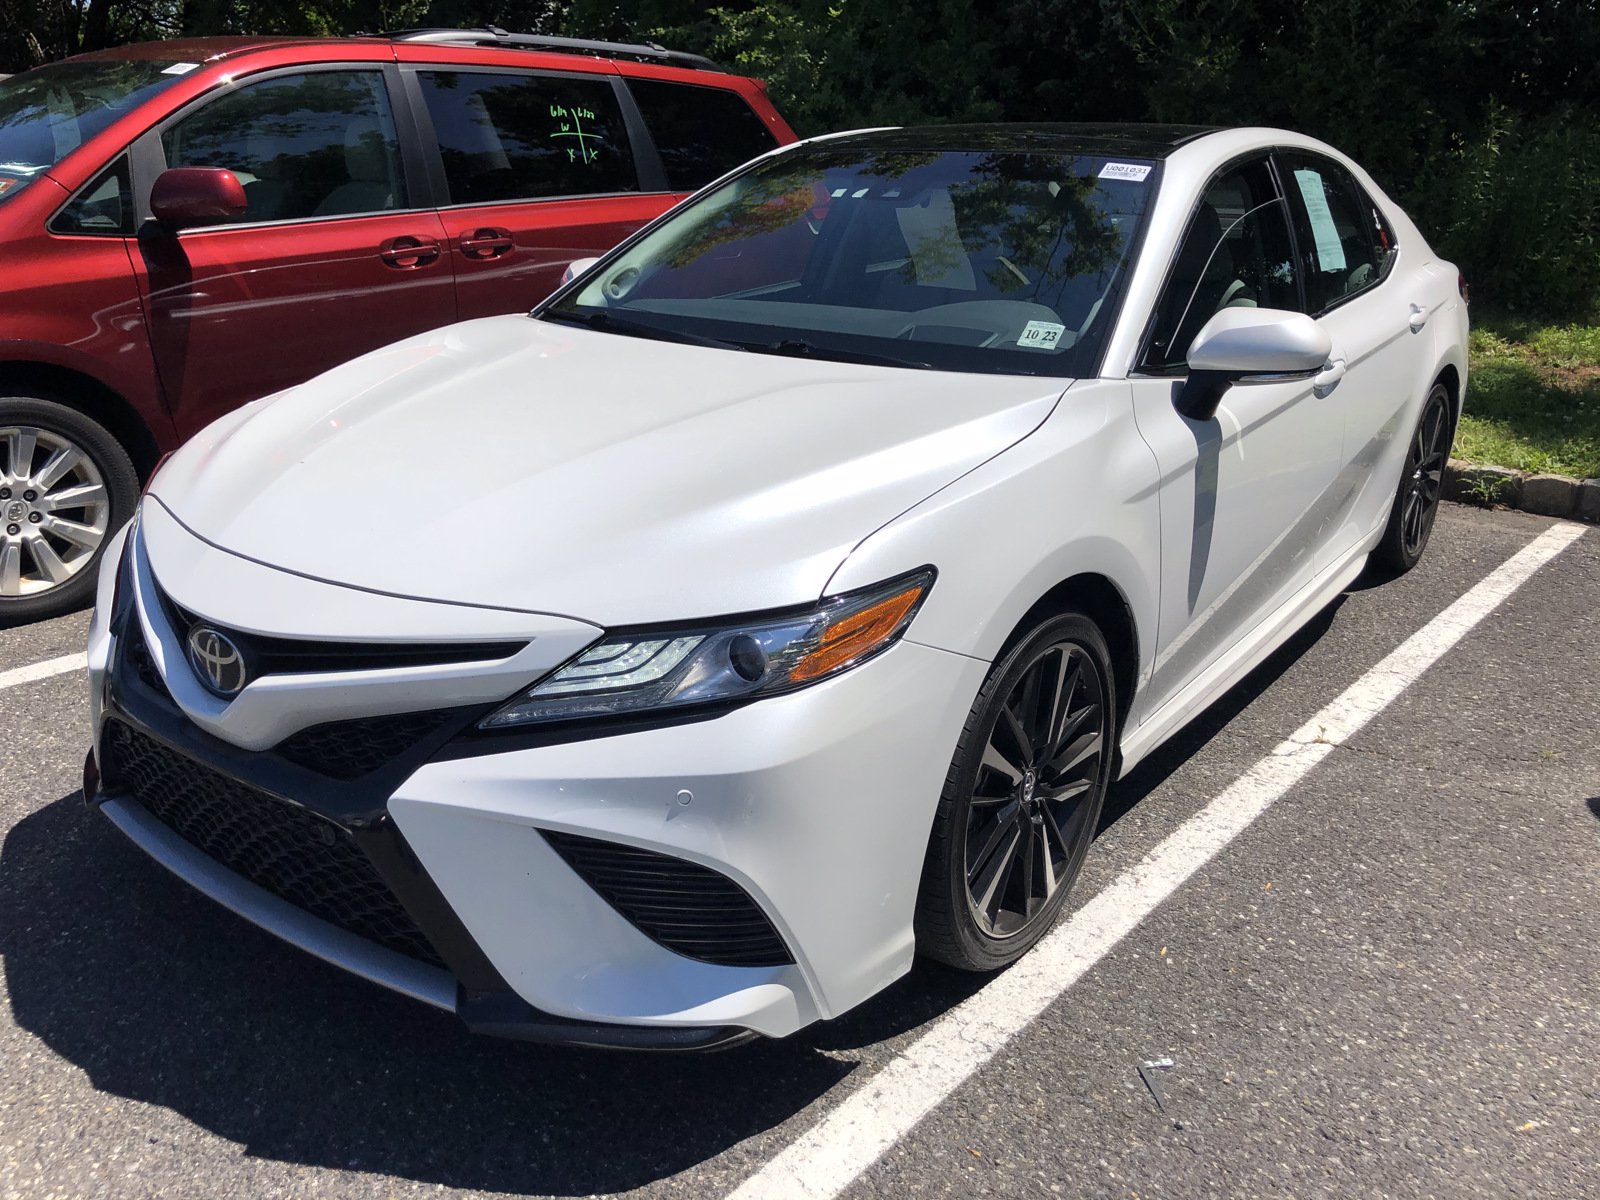 PreOwned 2018 Toyota Camry XSE V6 FWD 4dr Car